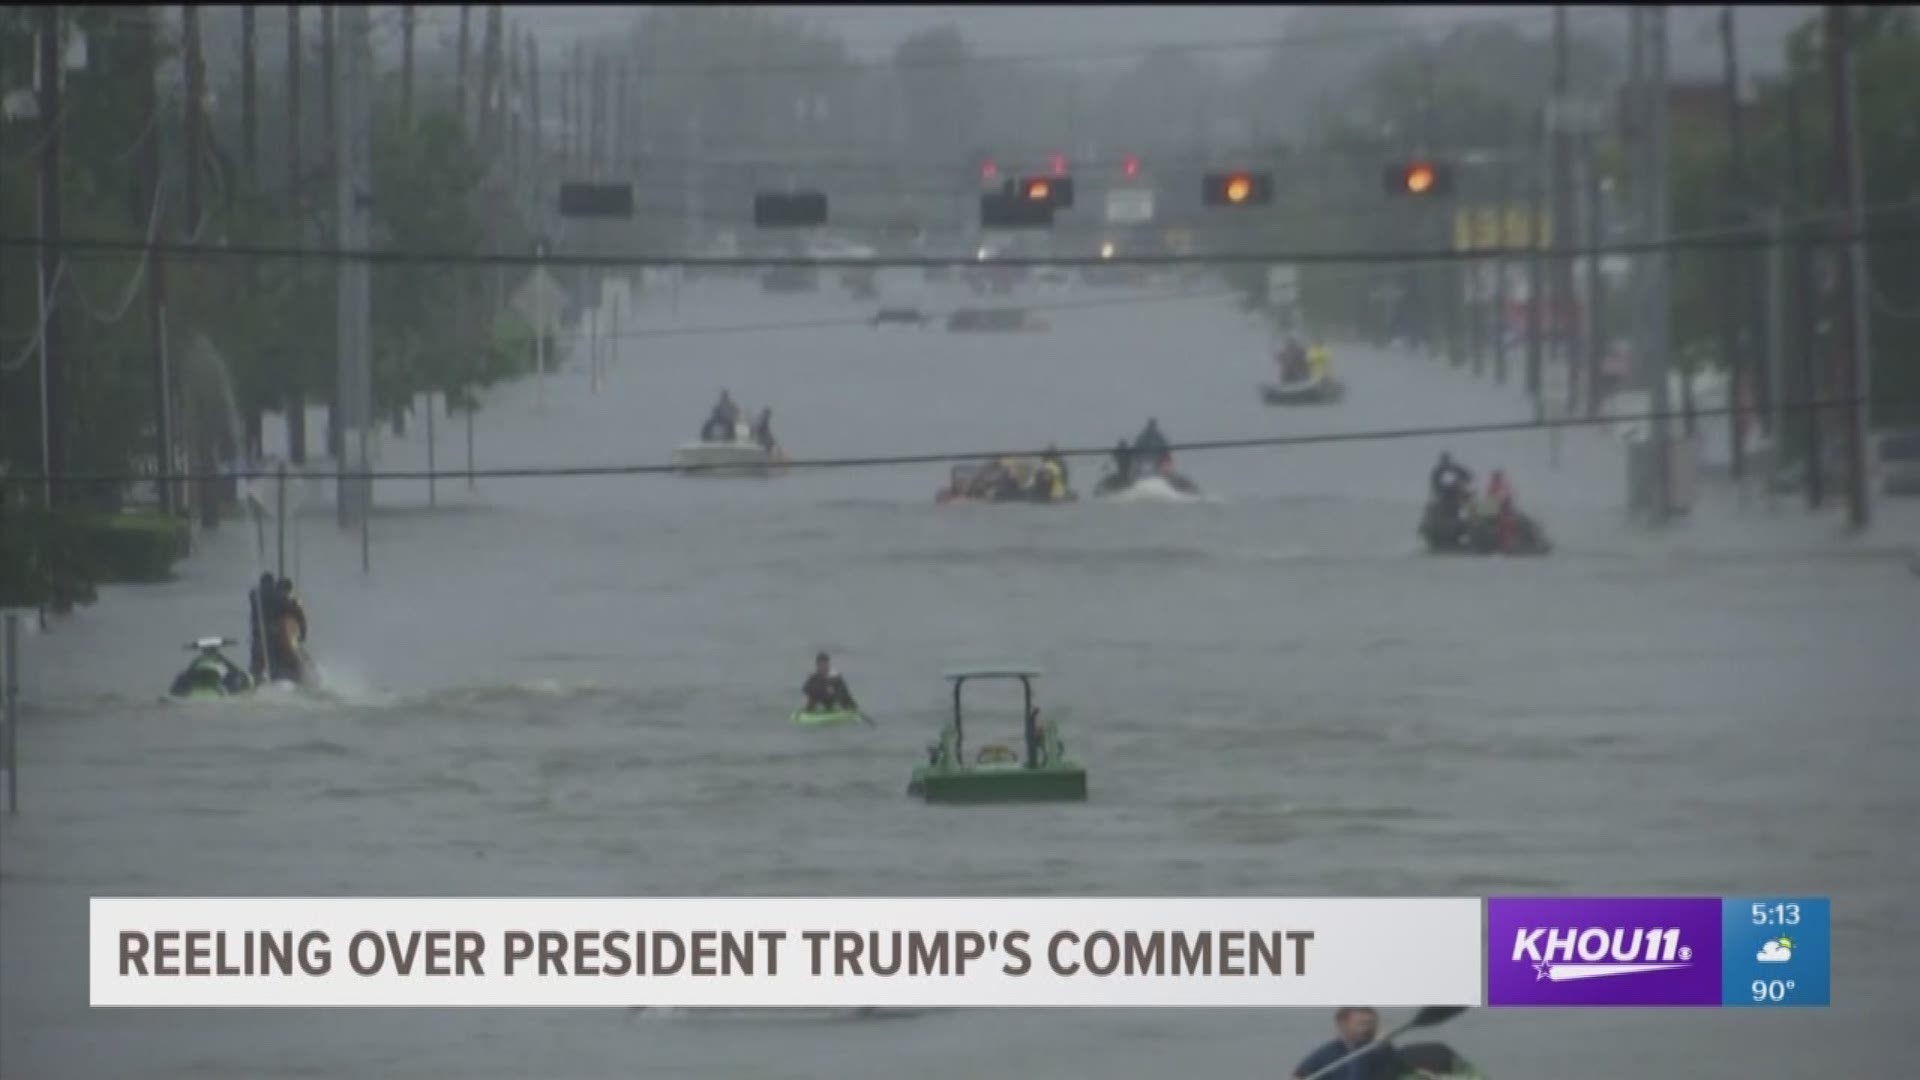 Twenty-four hours after President Trump's appearance at FEMA, and his comments about rescues continue to upset and frustrate the people who were in boats saving lives.